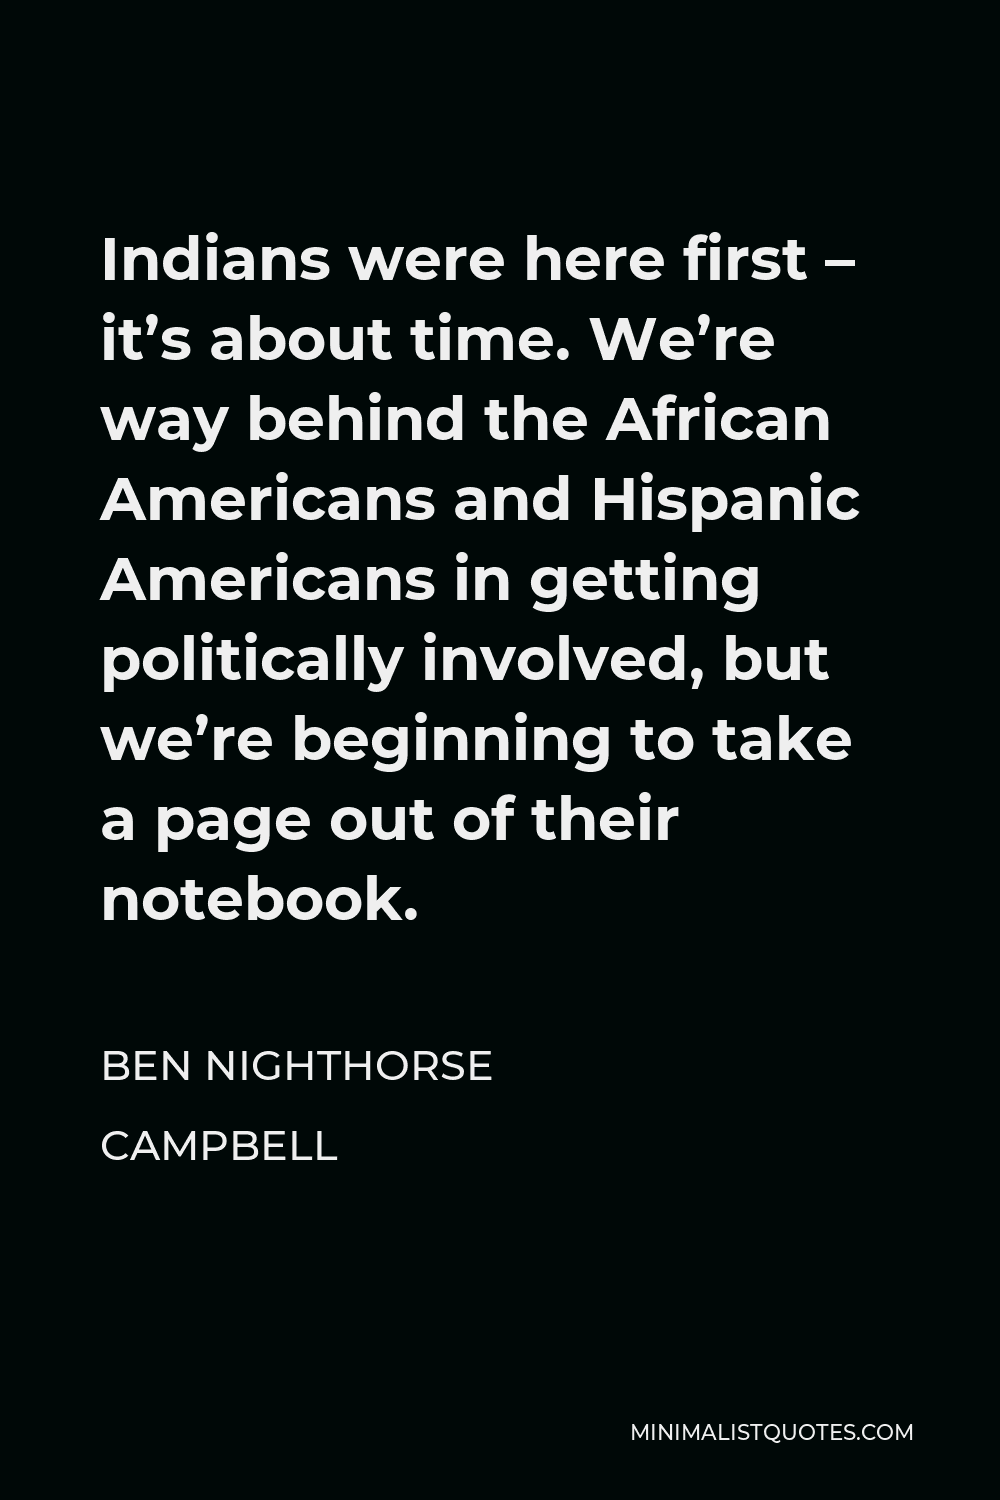 Ben Nighthorse Campbell Quote - Indians were here first – it’s about time. We’re way behind the African Americans and Hispanic Americans in getting politically involved, but we’re beginning to take a page out of their notebook.